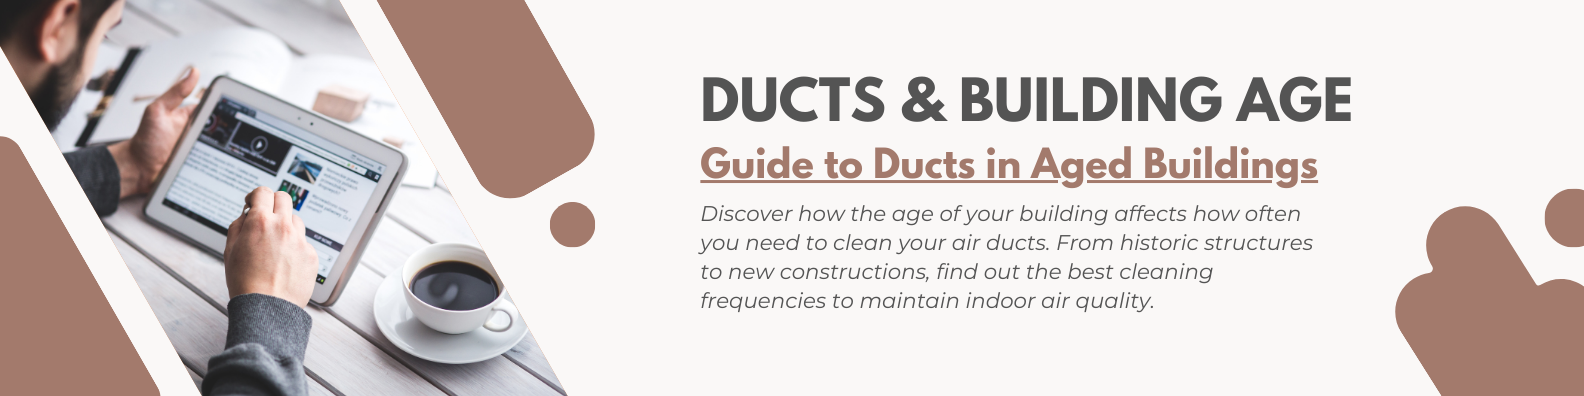 Guide to Ducts in Aged Buildings